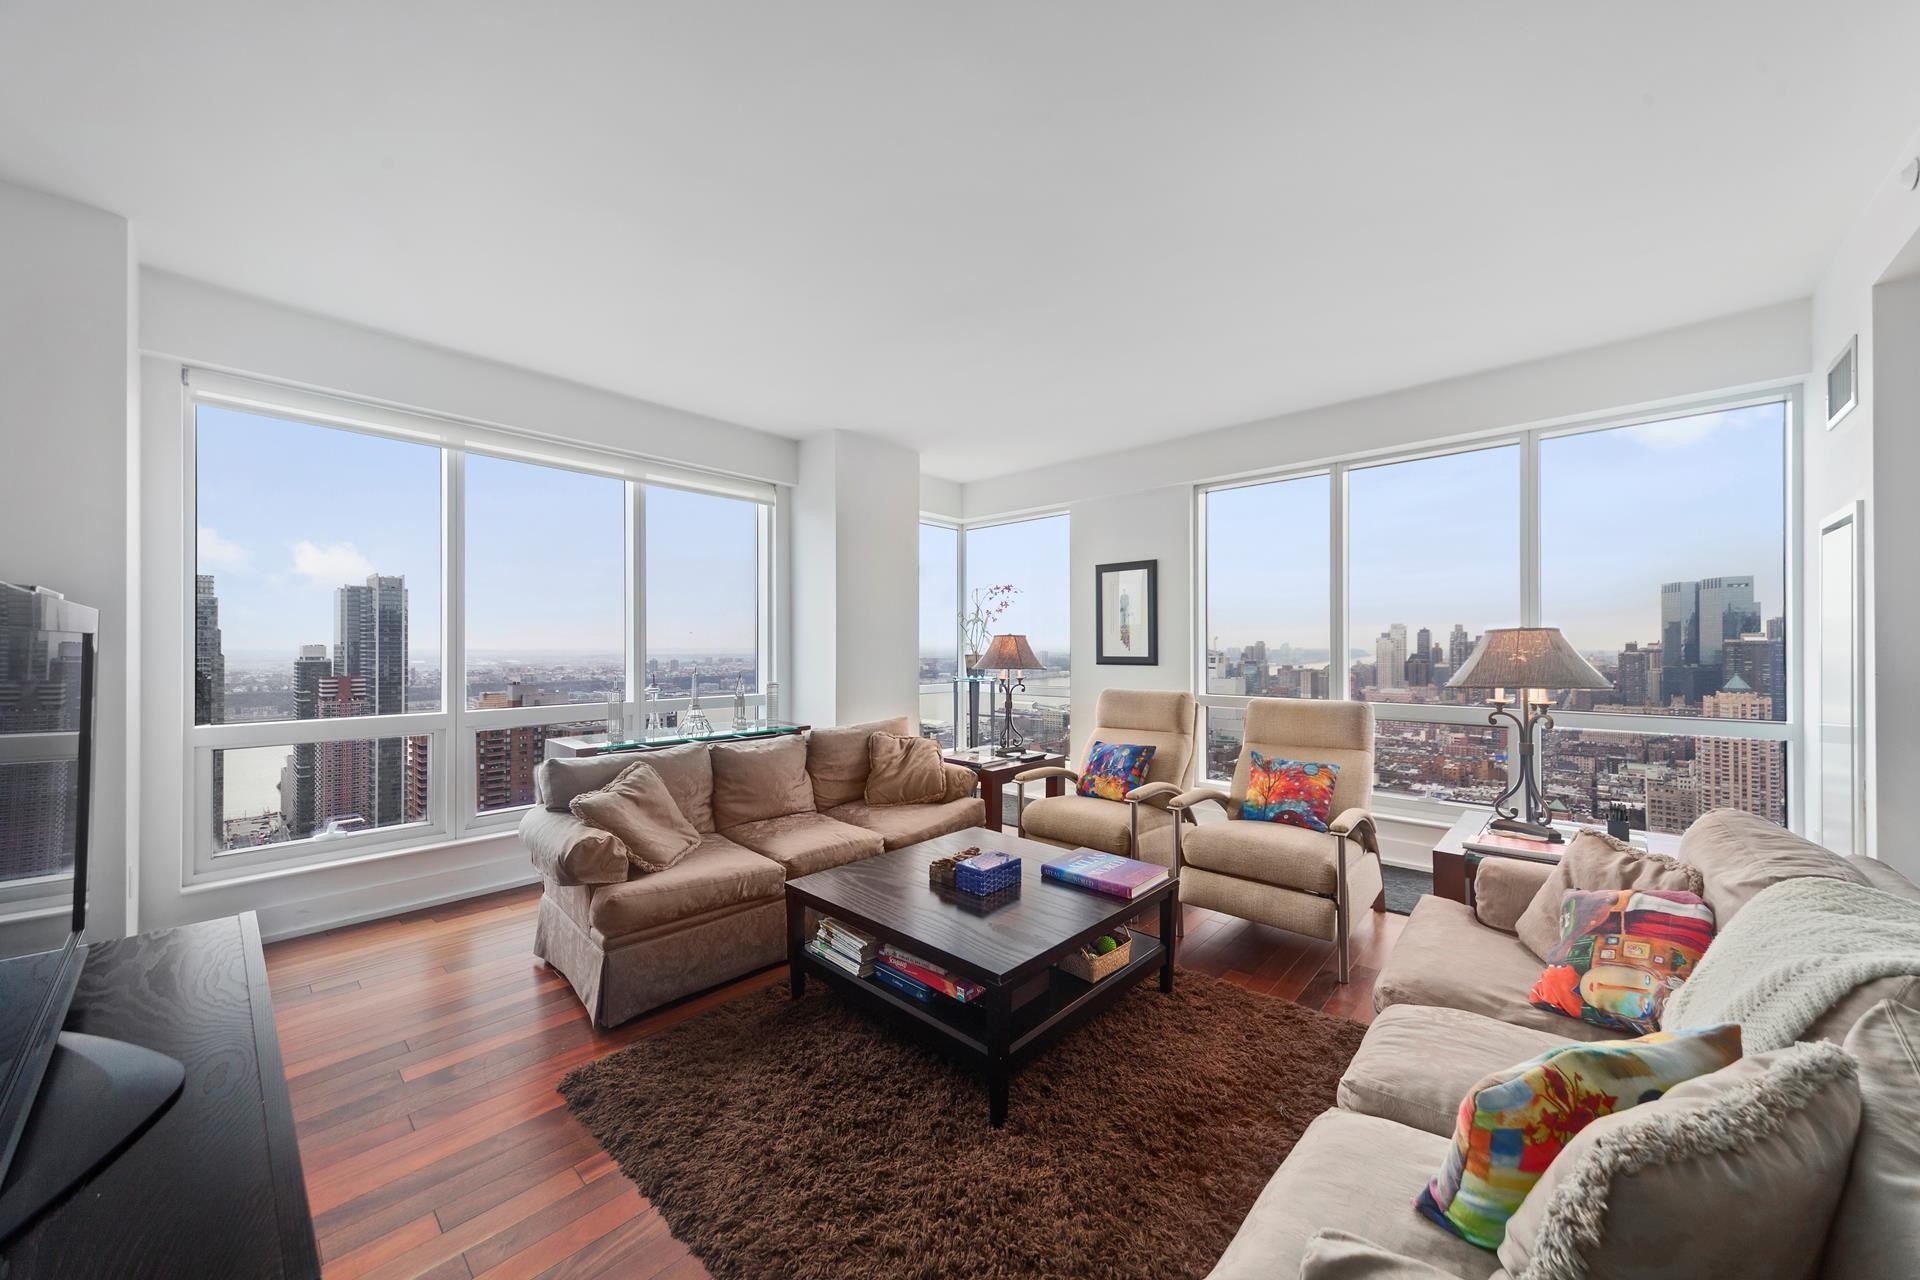 Condominium for Sale at Orion, 350 W 42ND ST, 49B Hudson Yards, New York, NY 10036